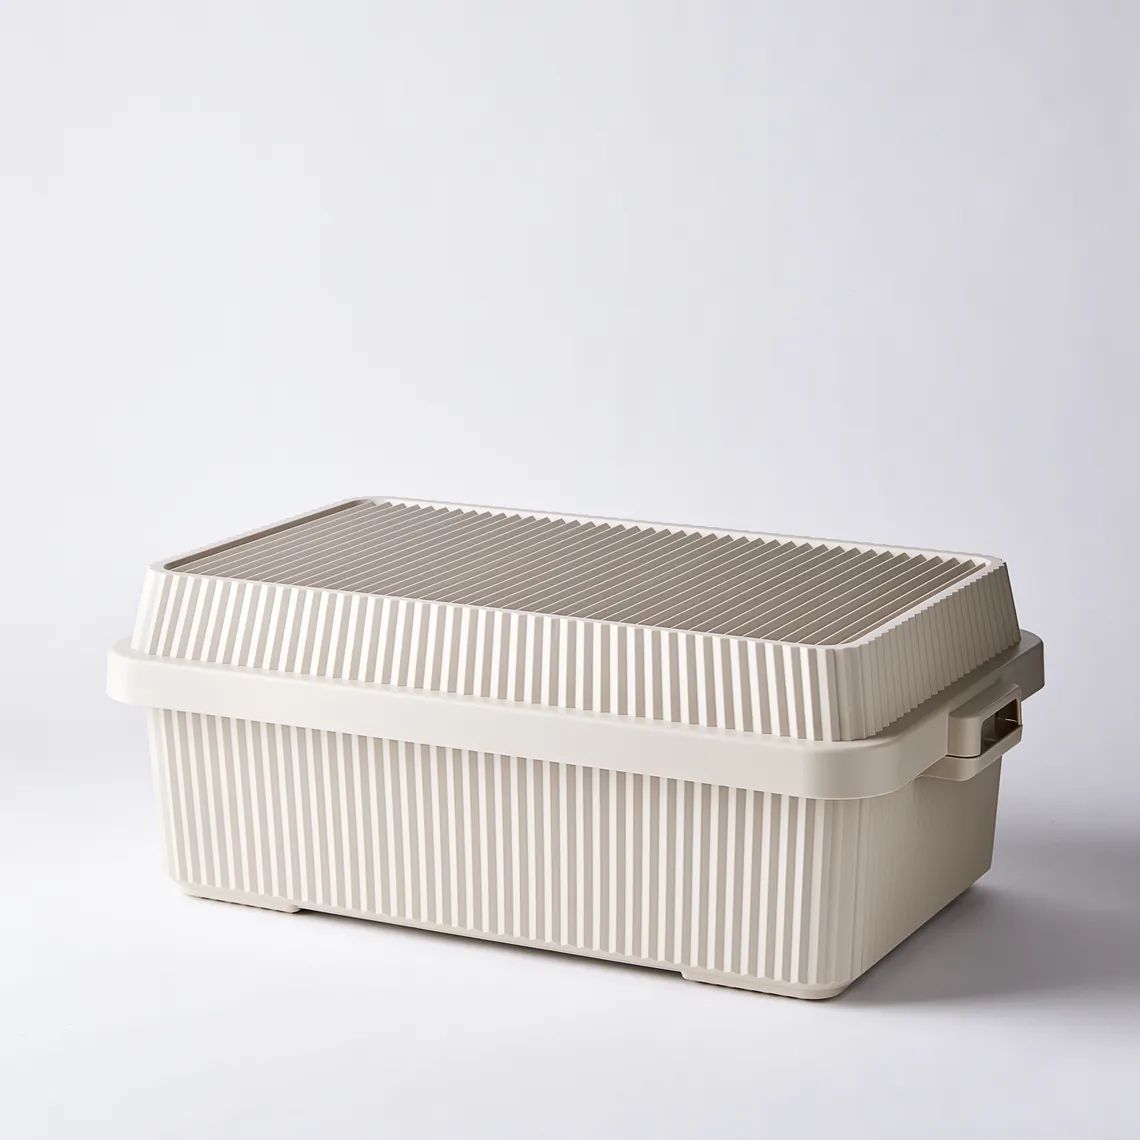 Stacking Storage Containers | Food52